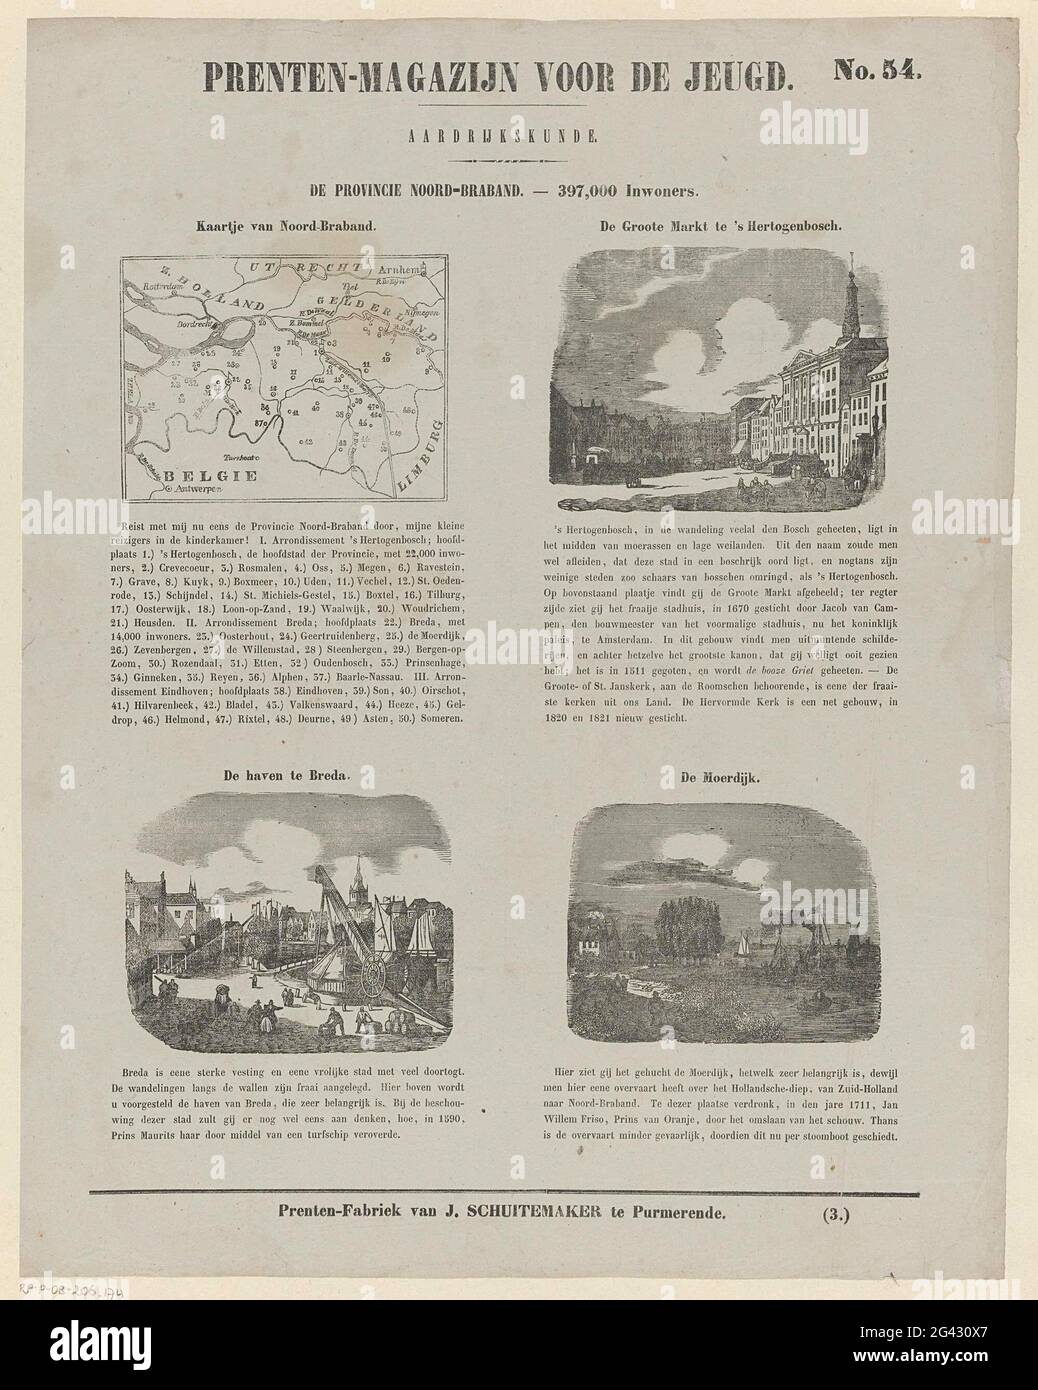 The province of Noord-Brabant. 397,000 inhabitants; Print warehouse for the  youth; Geography. Leaf with 4 shows about the province of Noord-Brabant  with a map and important places: the Grote Markt in Den